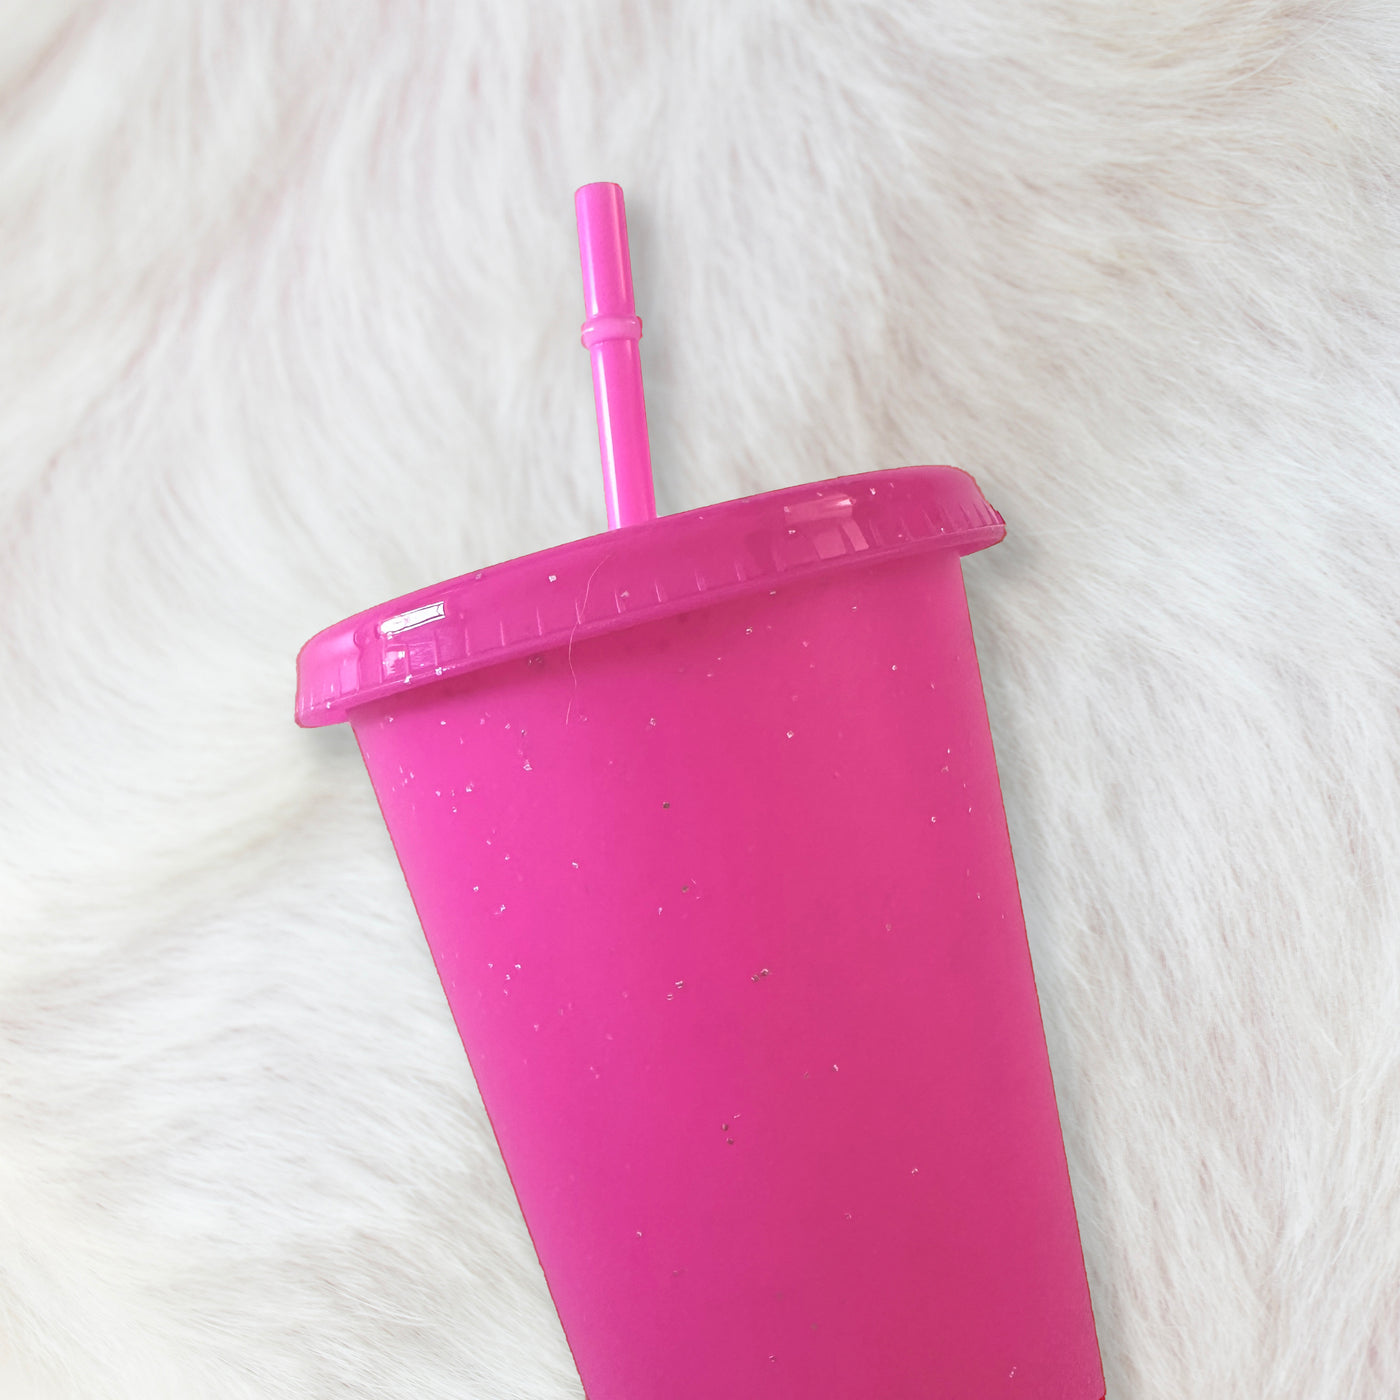 Hot Pink  - Glitter colour Cold cup 24oz